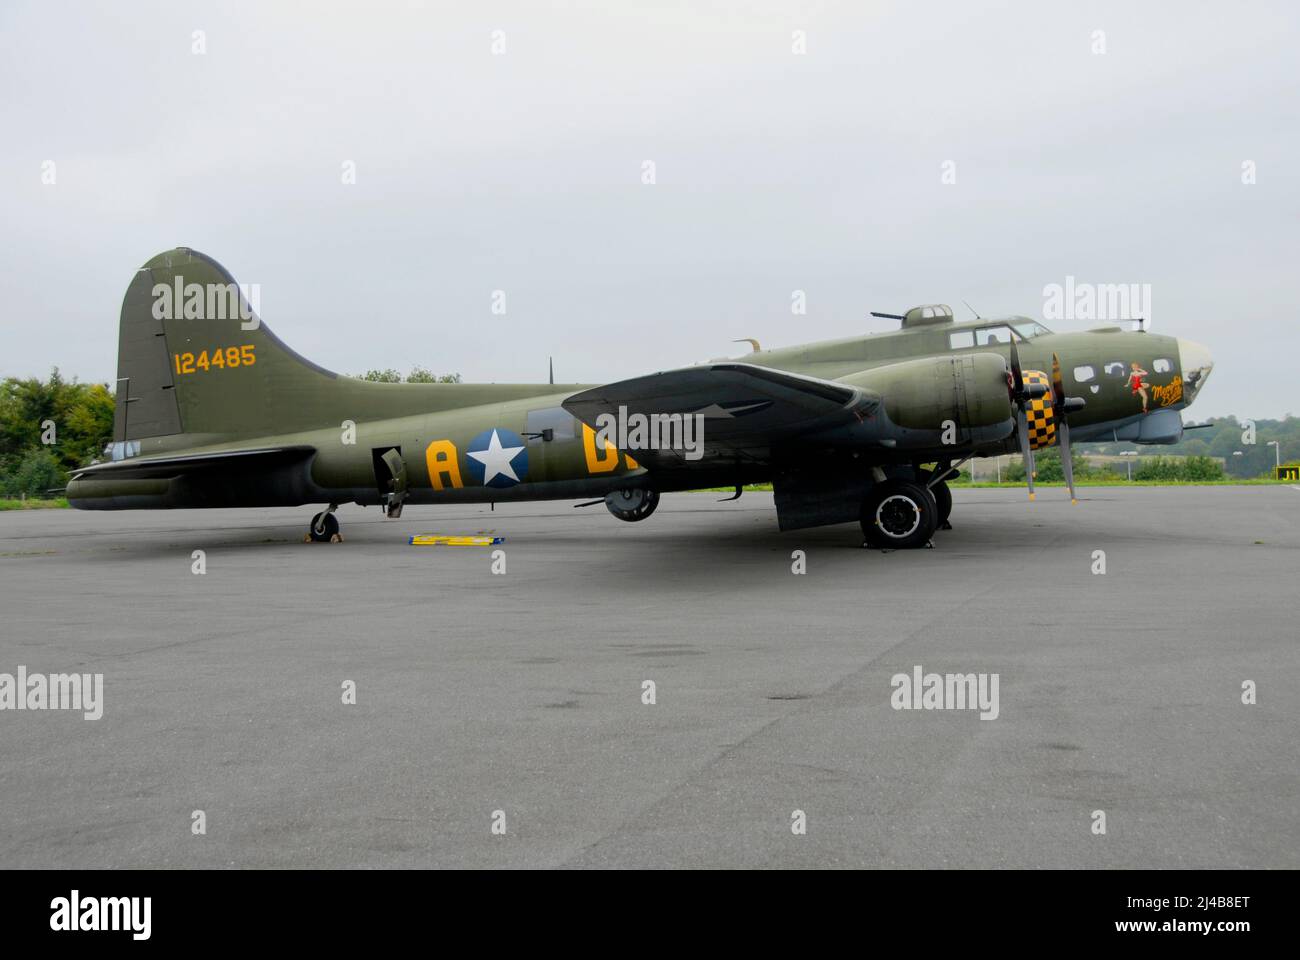 The Memphis Belle Boeing B-17F Flying Fortress used during the Second World War on display at an air show at Biggin Hill, Kent, England Stock Photo